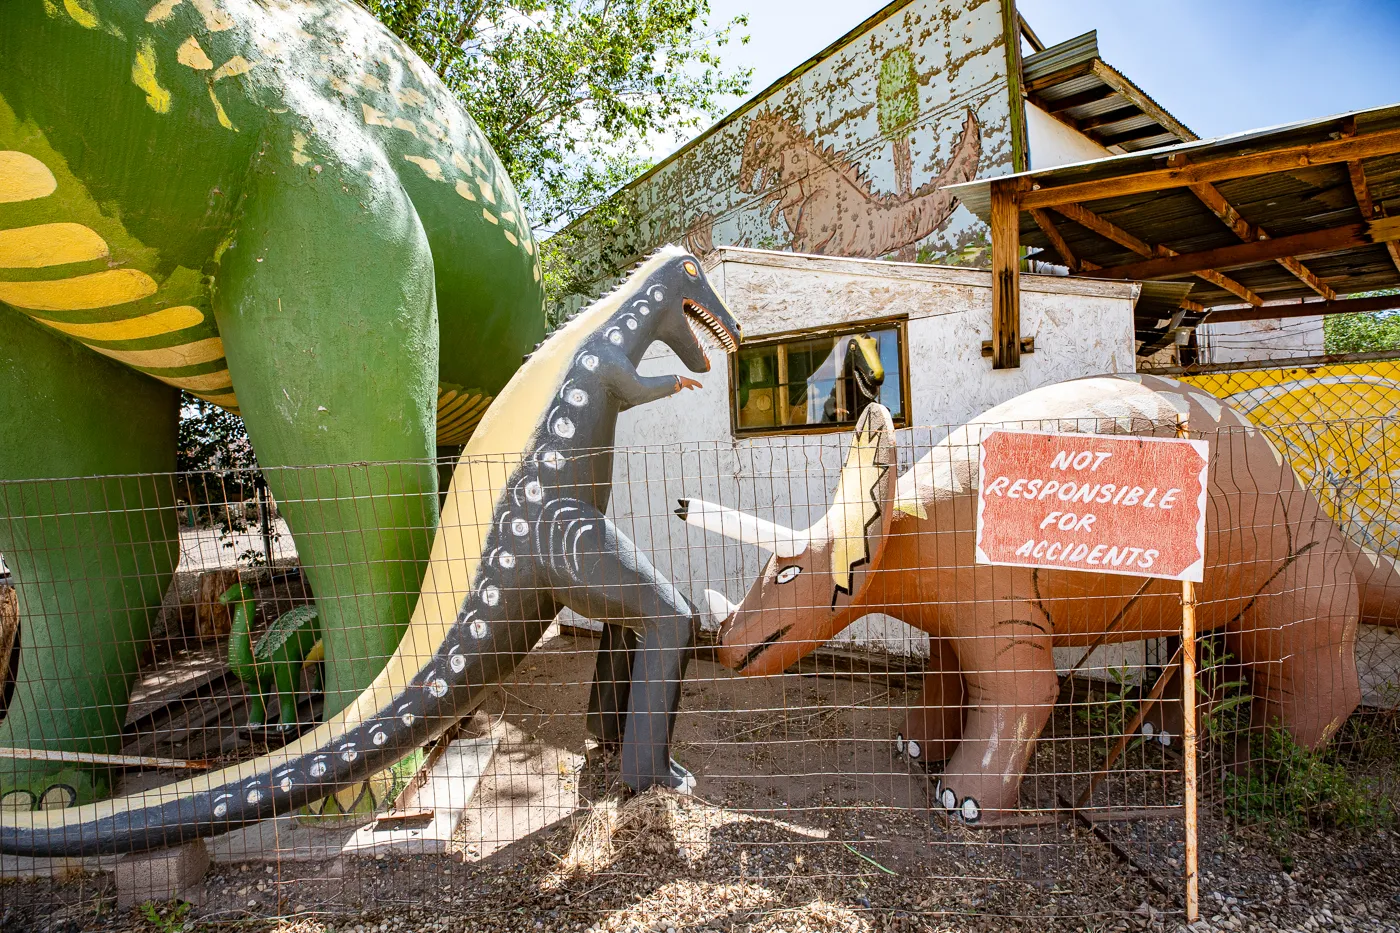 Rainbow Rock Shop Dinosaurs in Holbrook, Arizona Route 66 Roadside Attraction